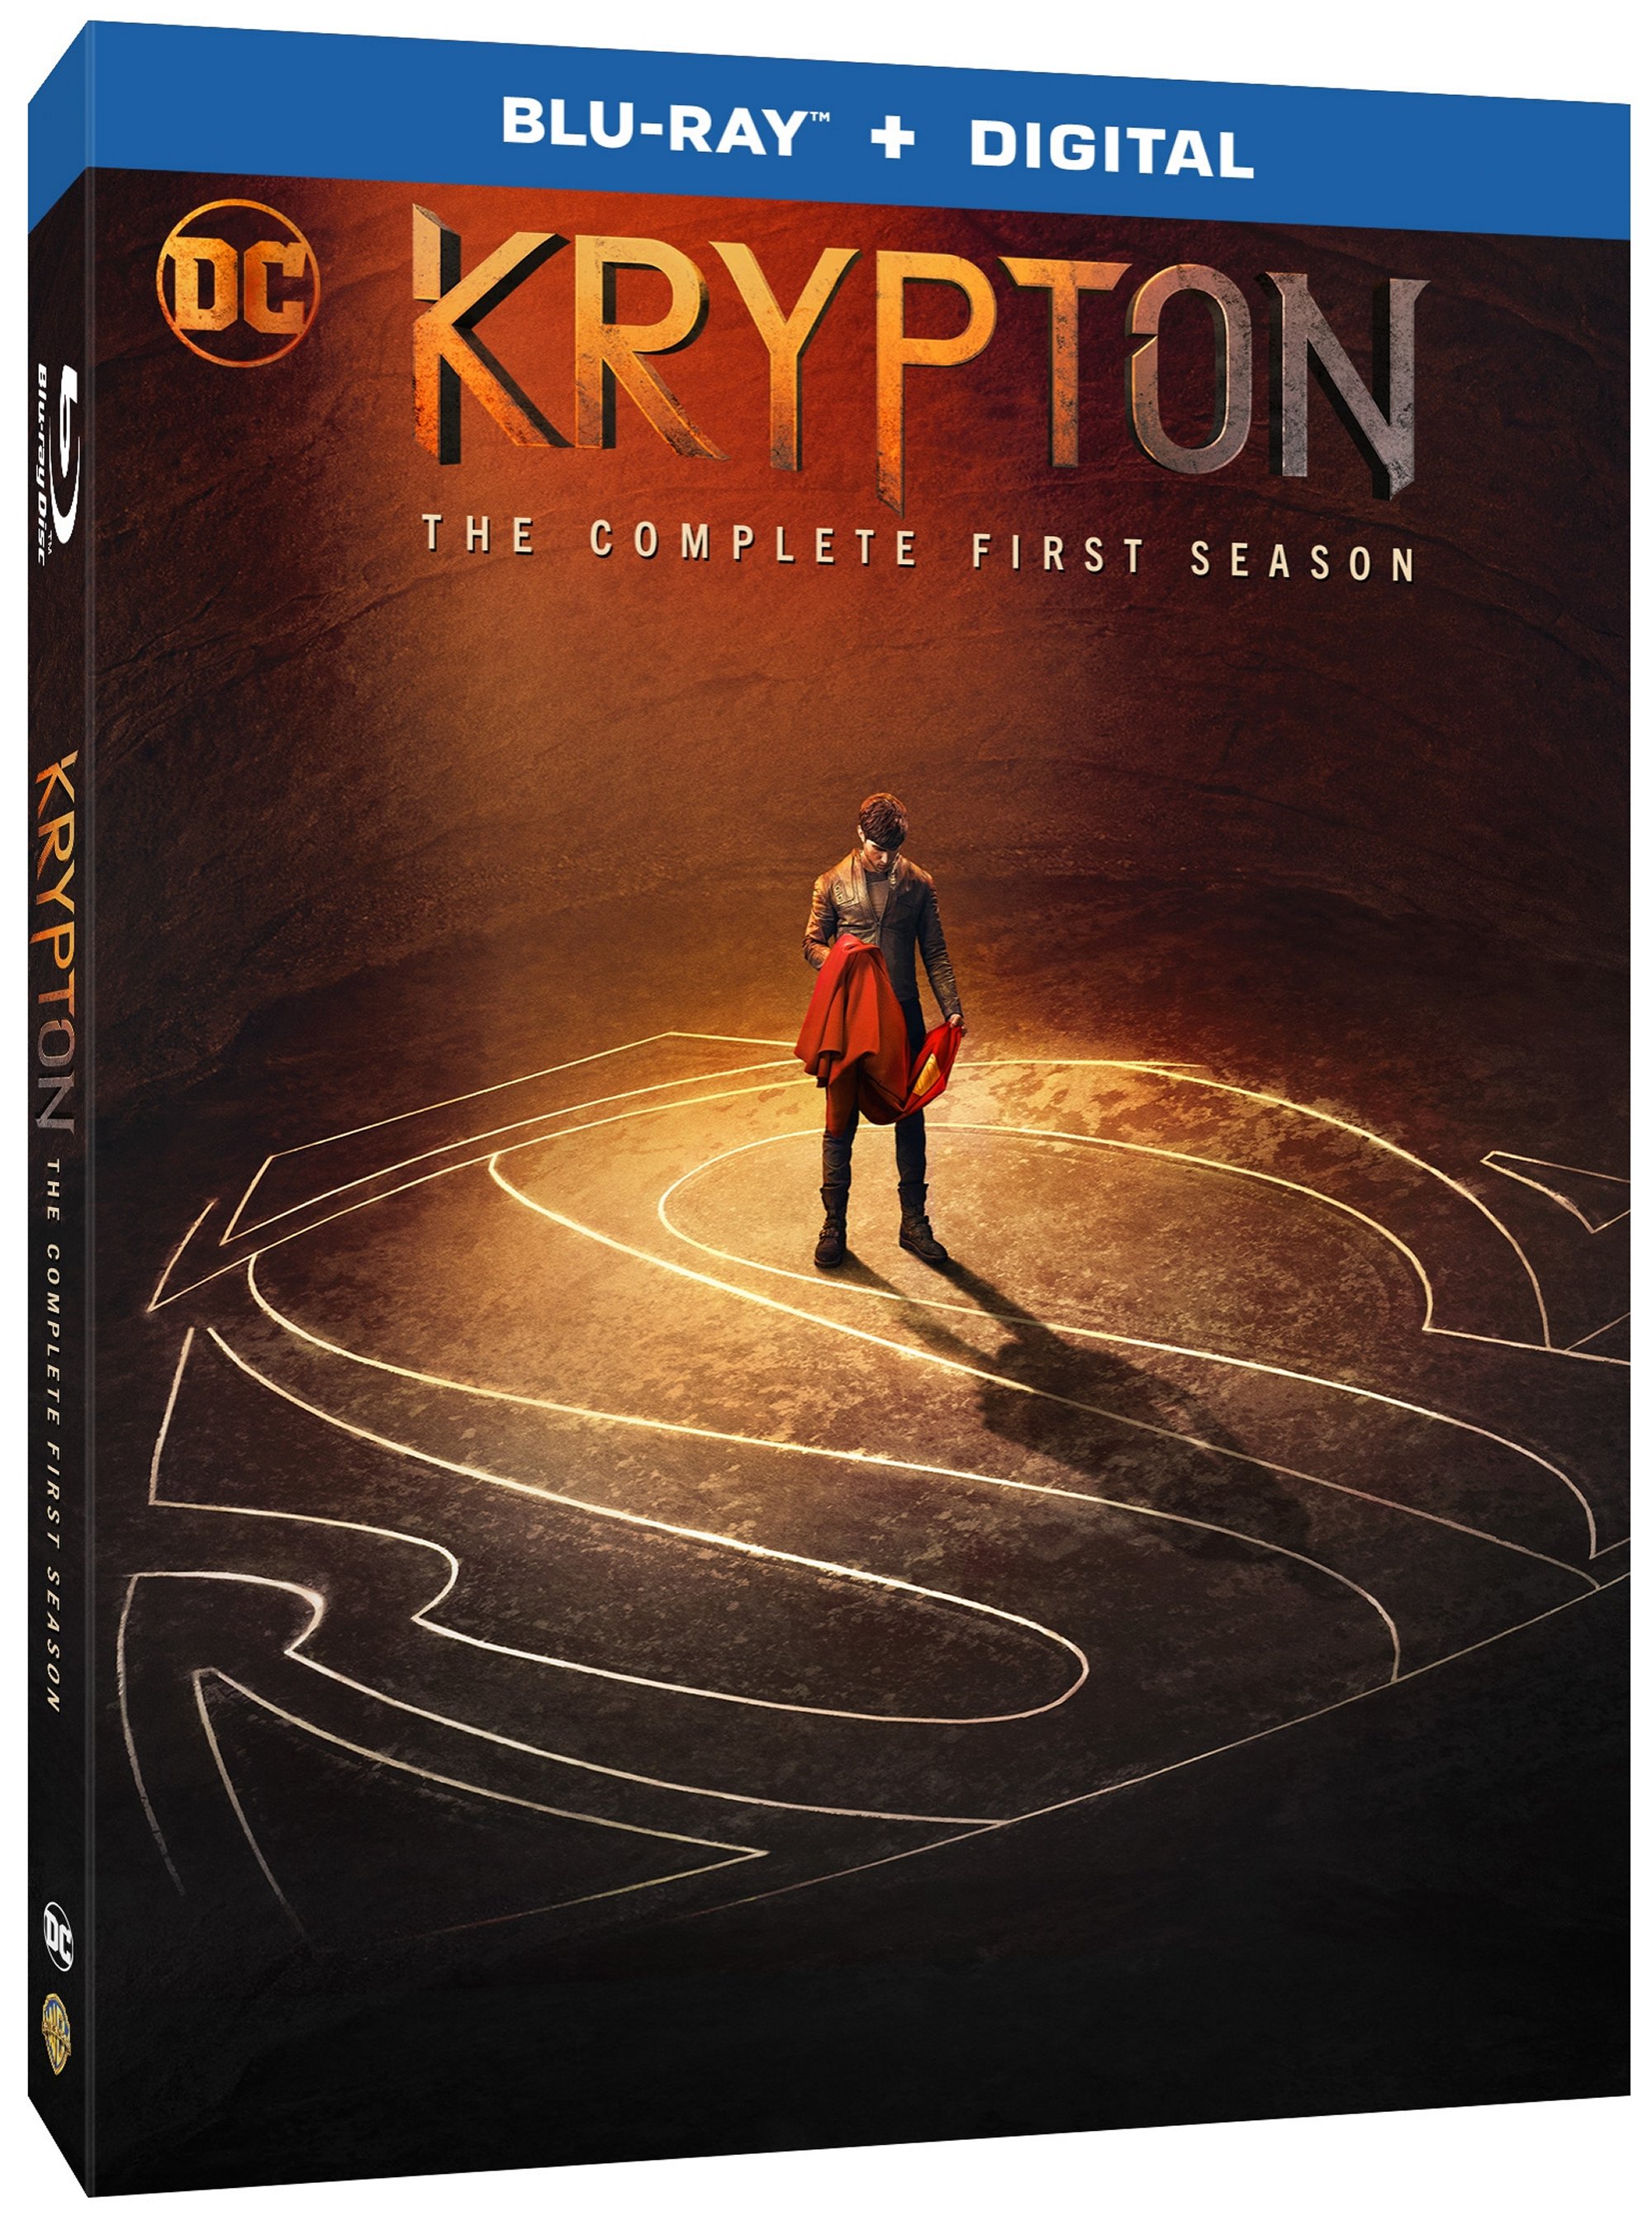 Krypton: The Complete First Season Blu-Ray cover (Warner Bros. Home Entertainment)